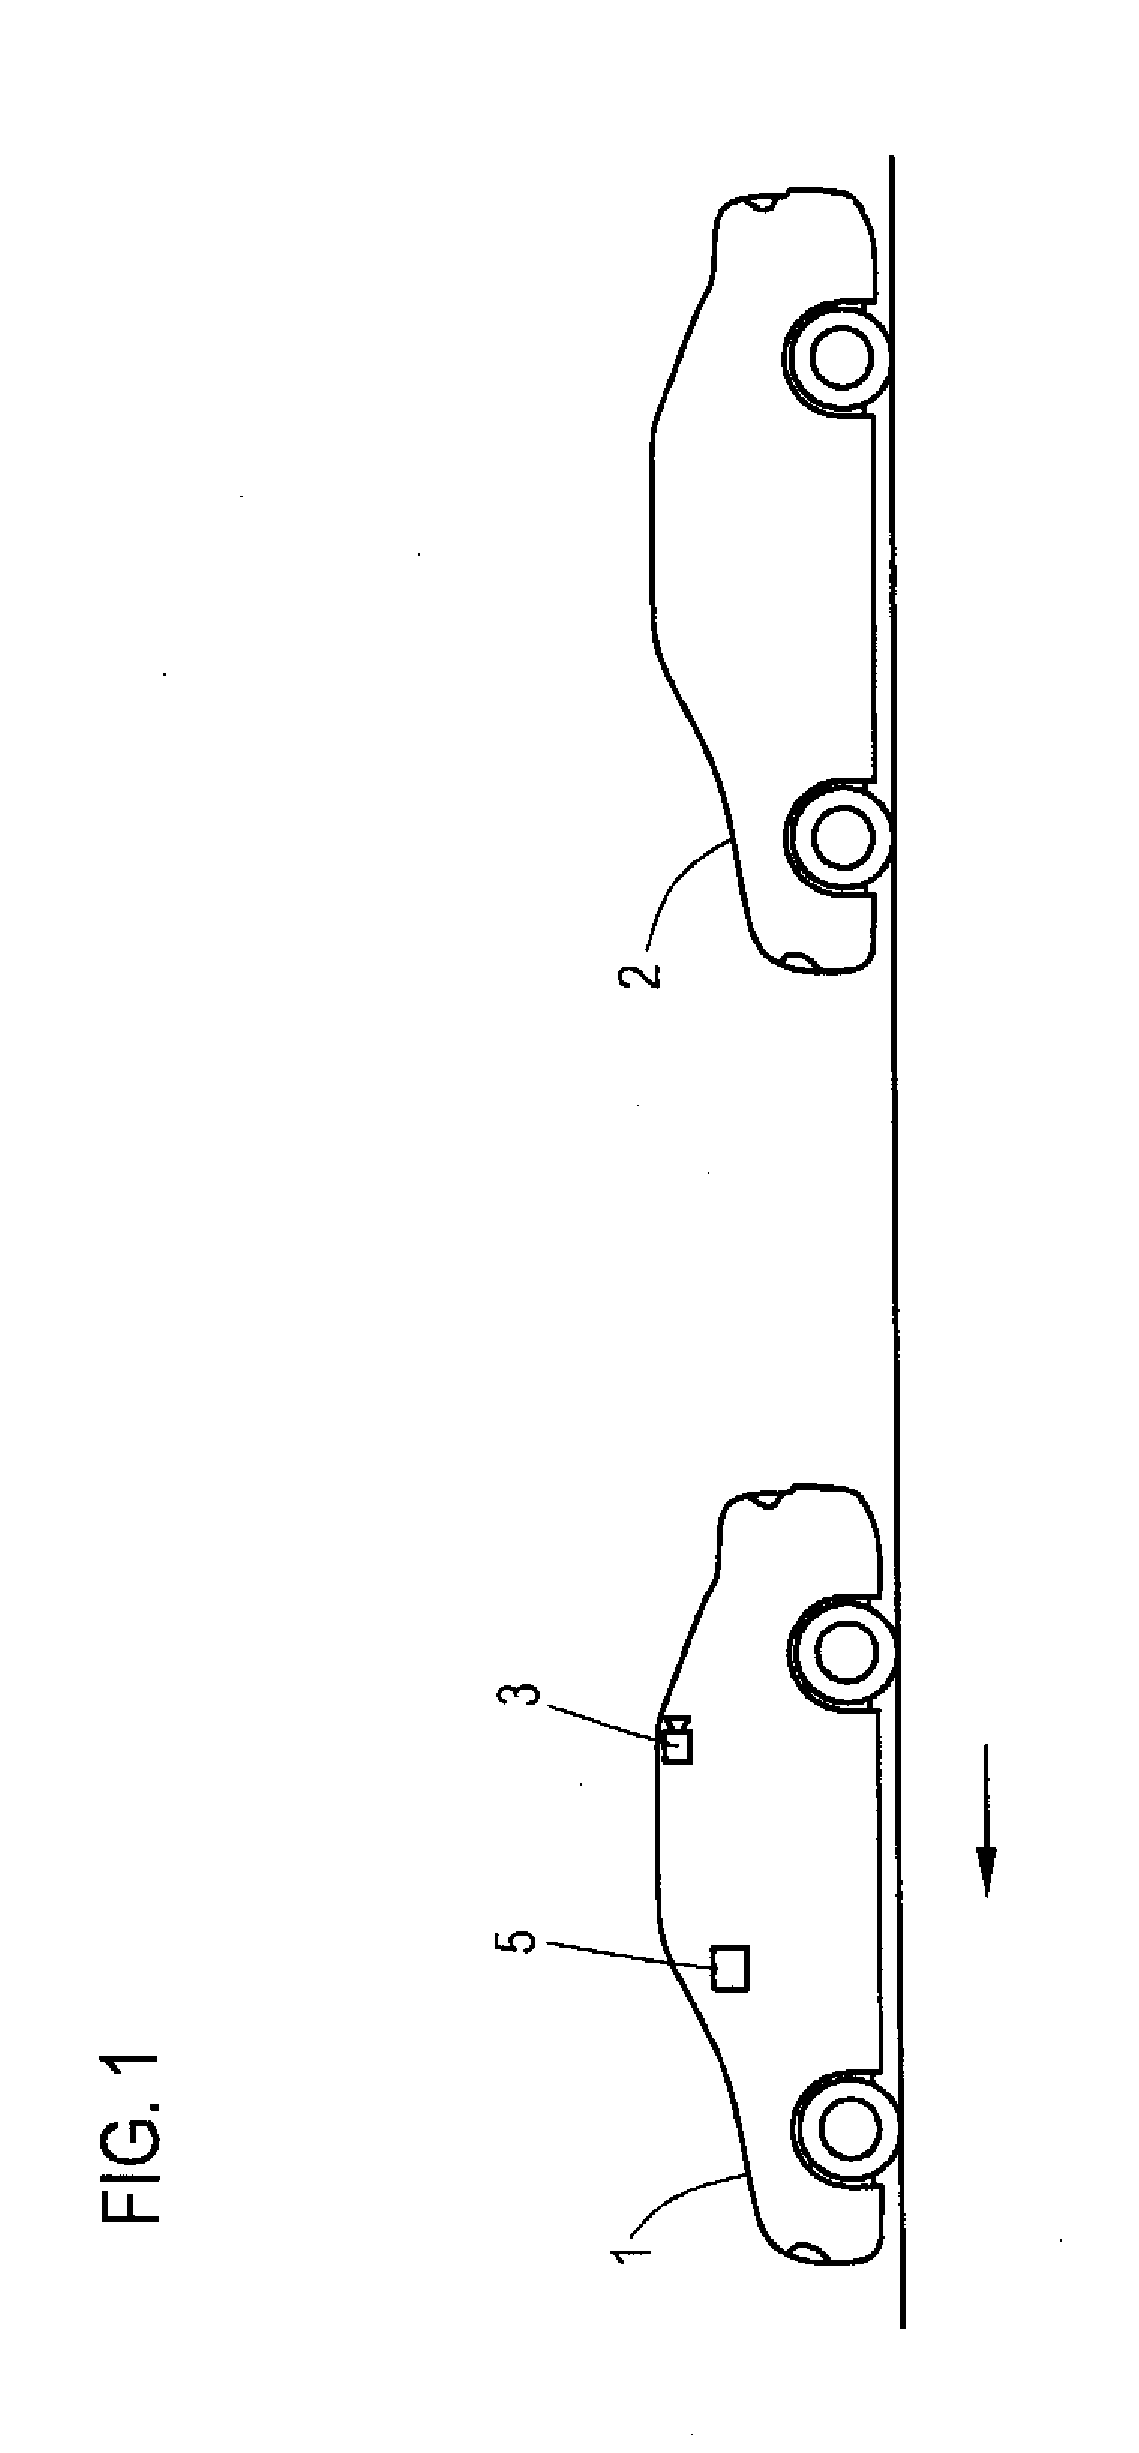 Method for visualizing the vicinity of a motor vehicle